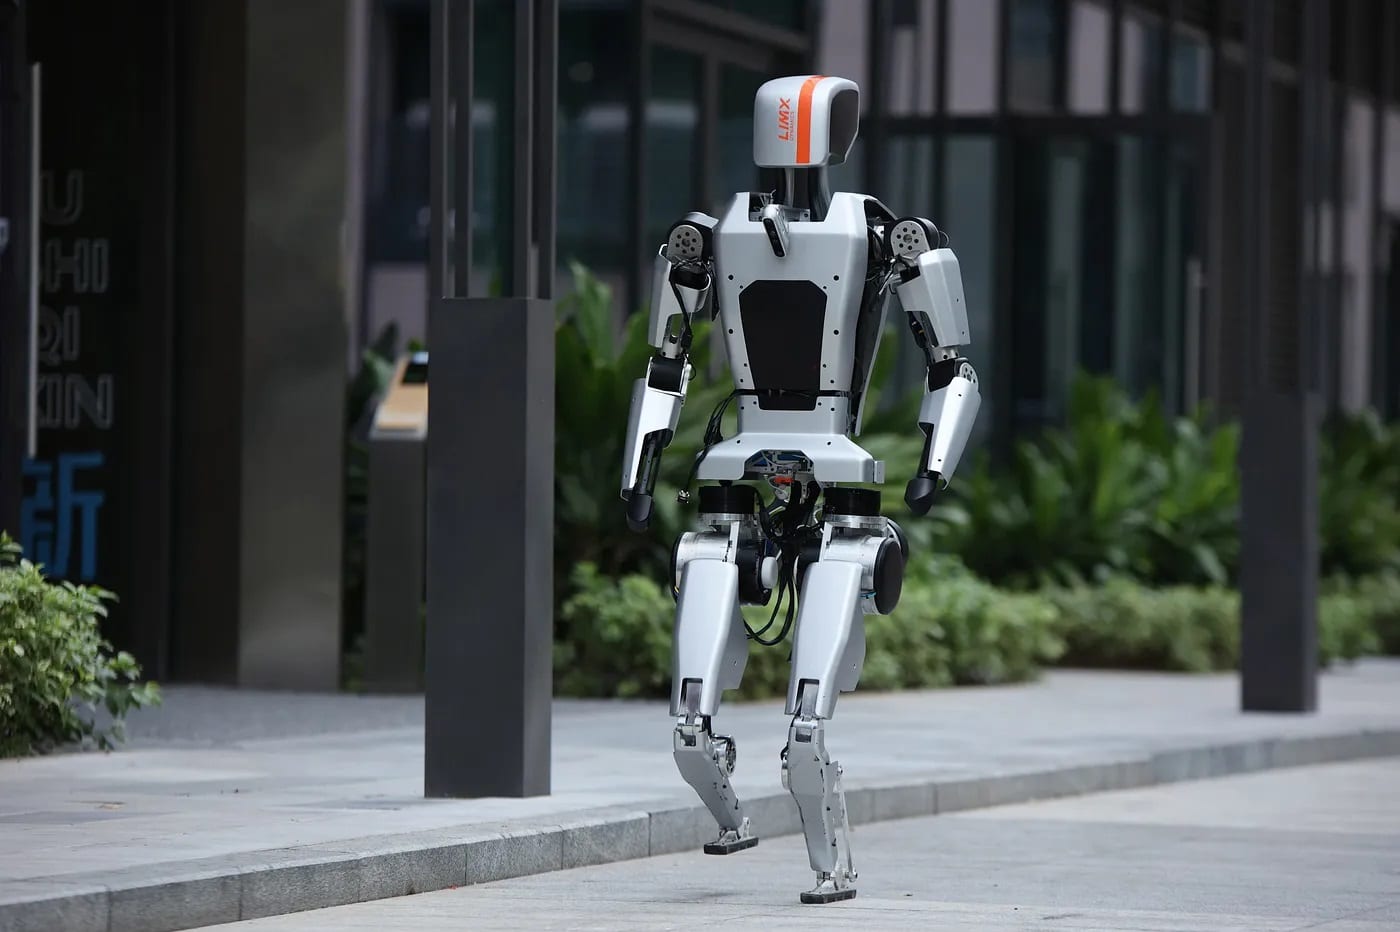 LimX Dynamics’ humanoid robot achieves real-time perceptive stair climbing.